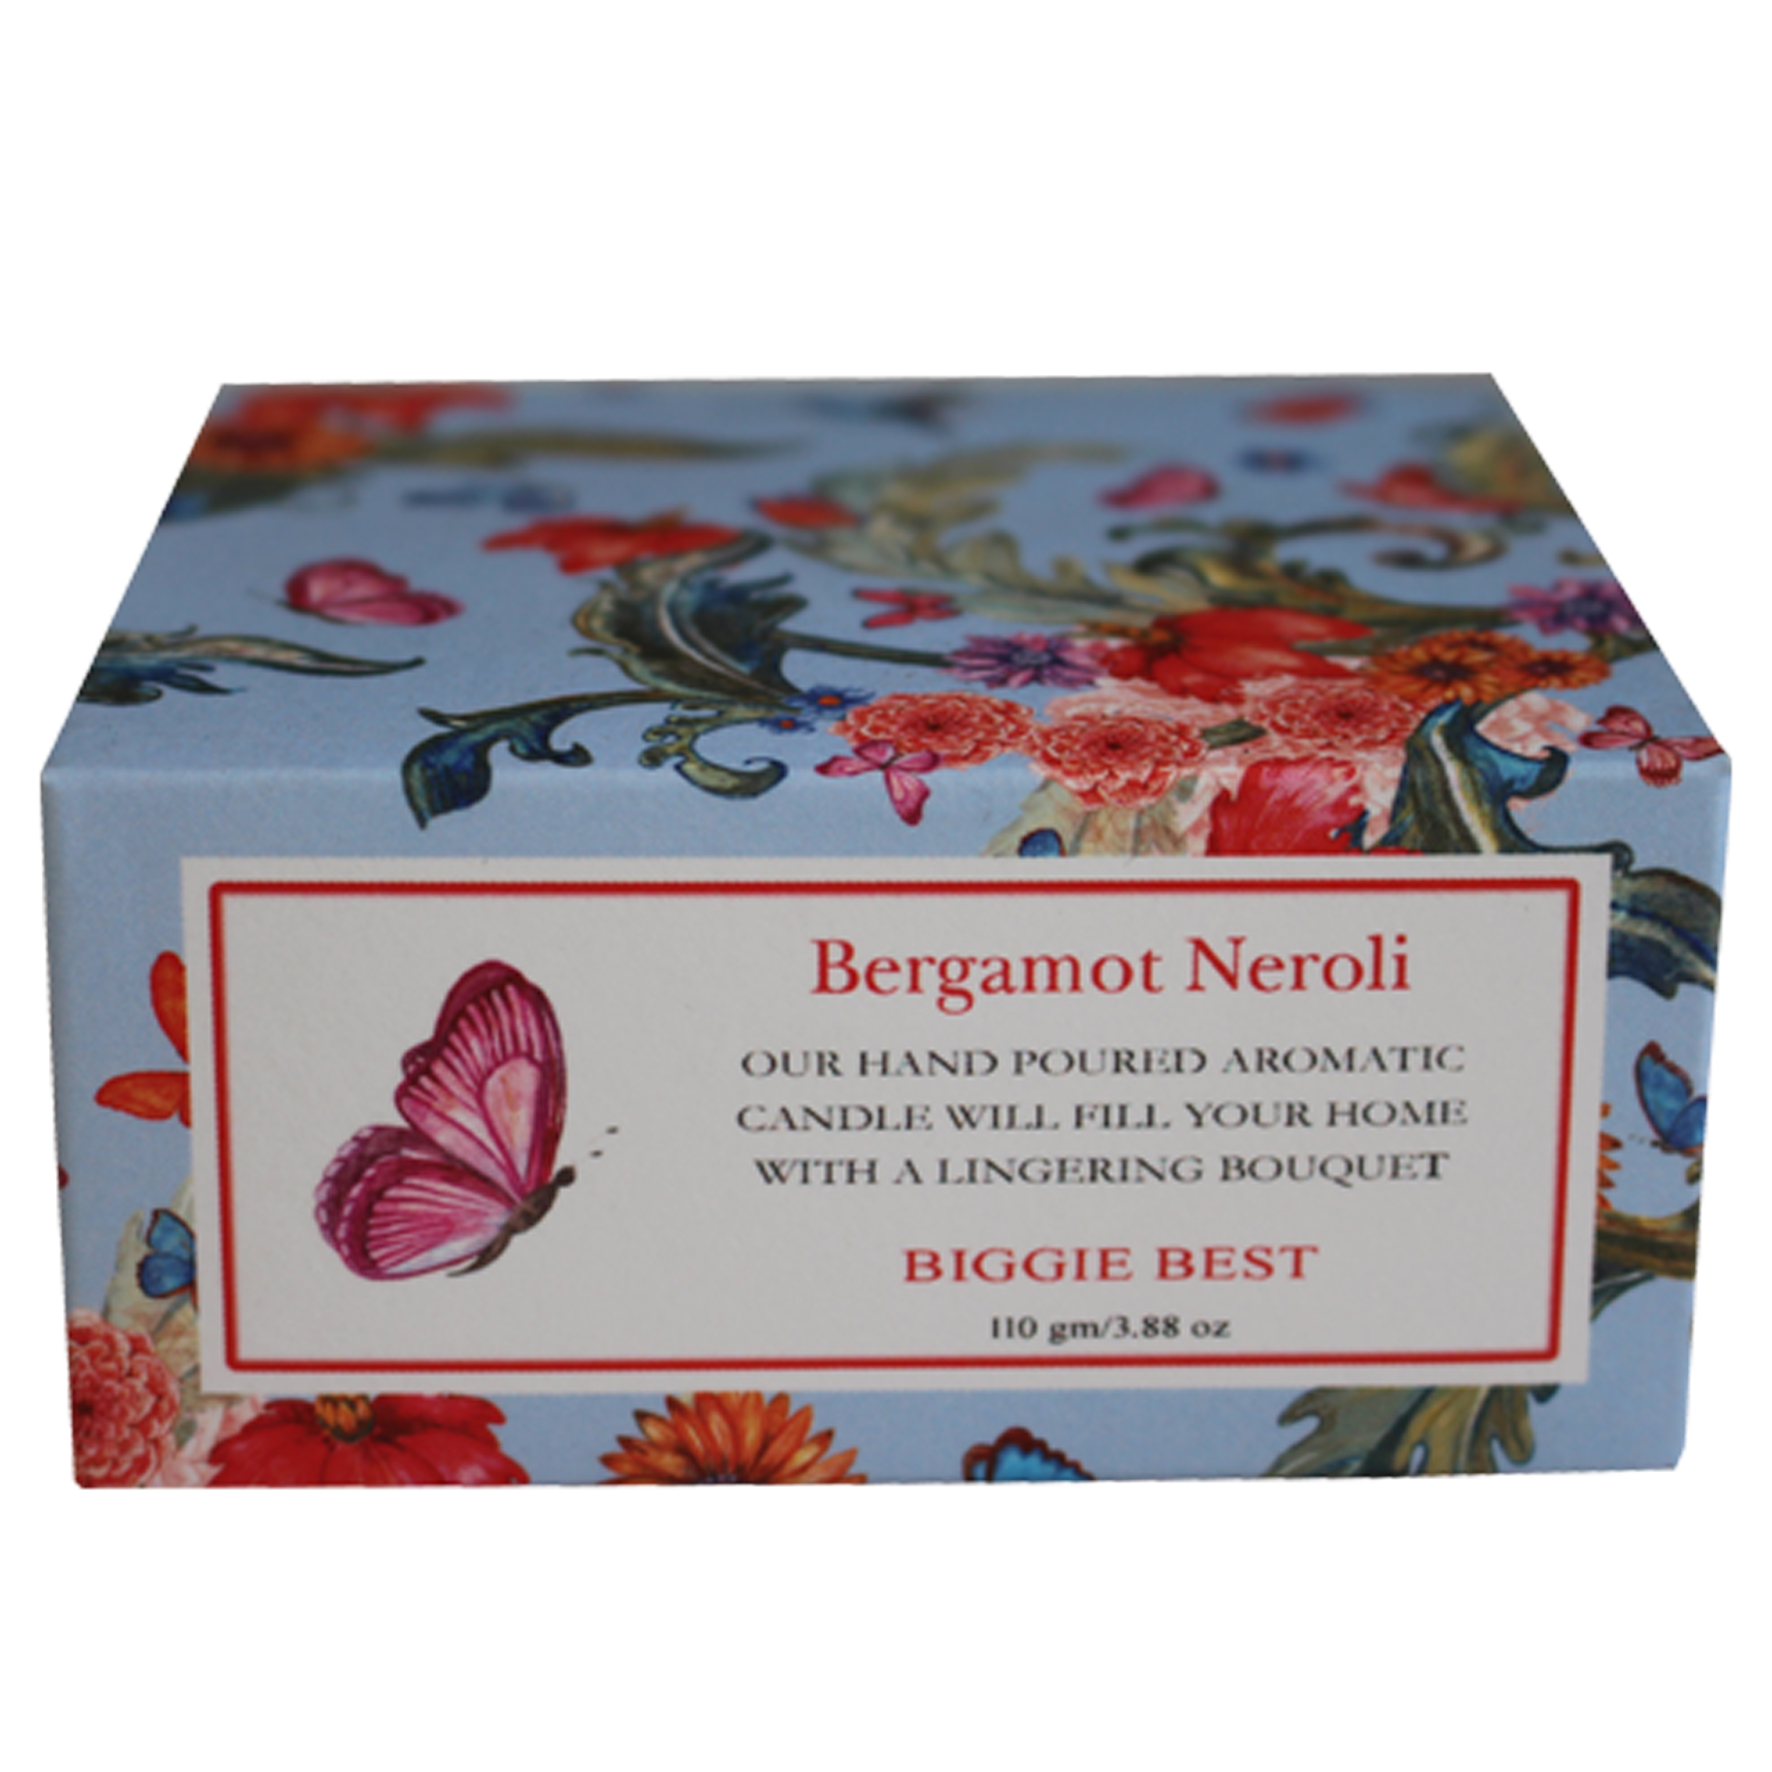 TIN BERGAMONT NEROL Scented Candle